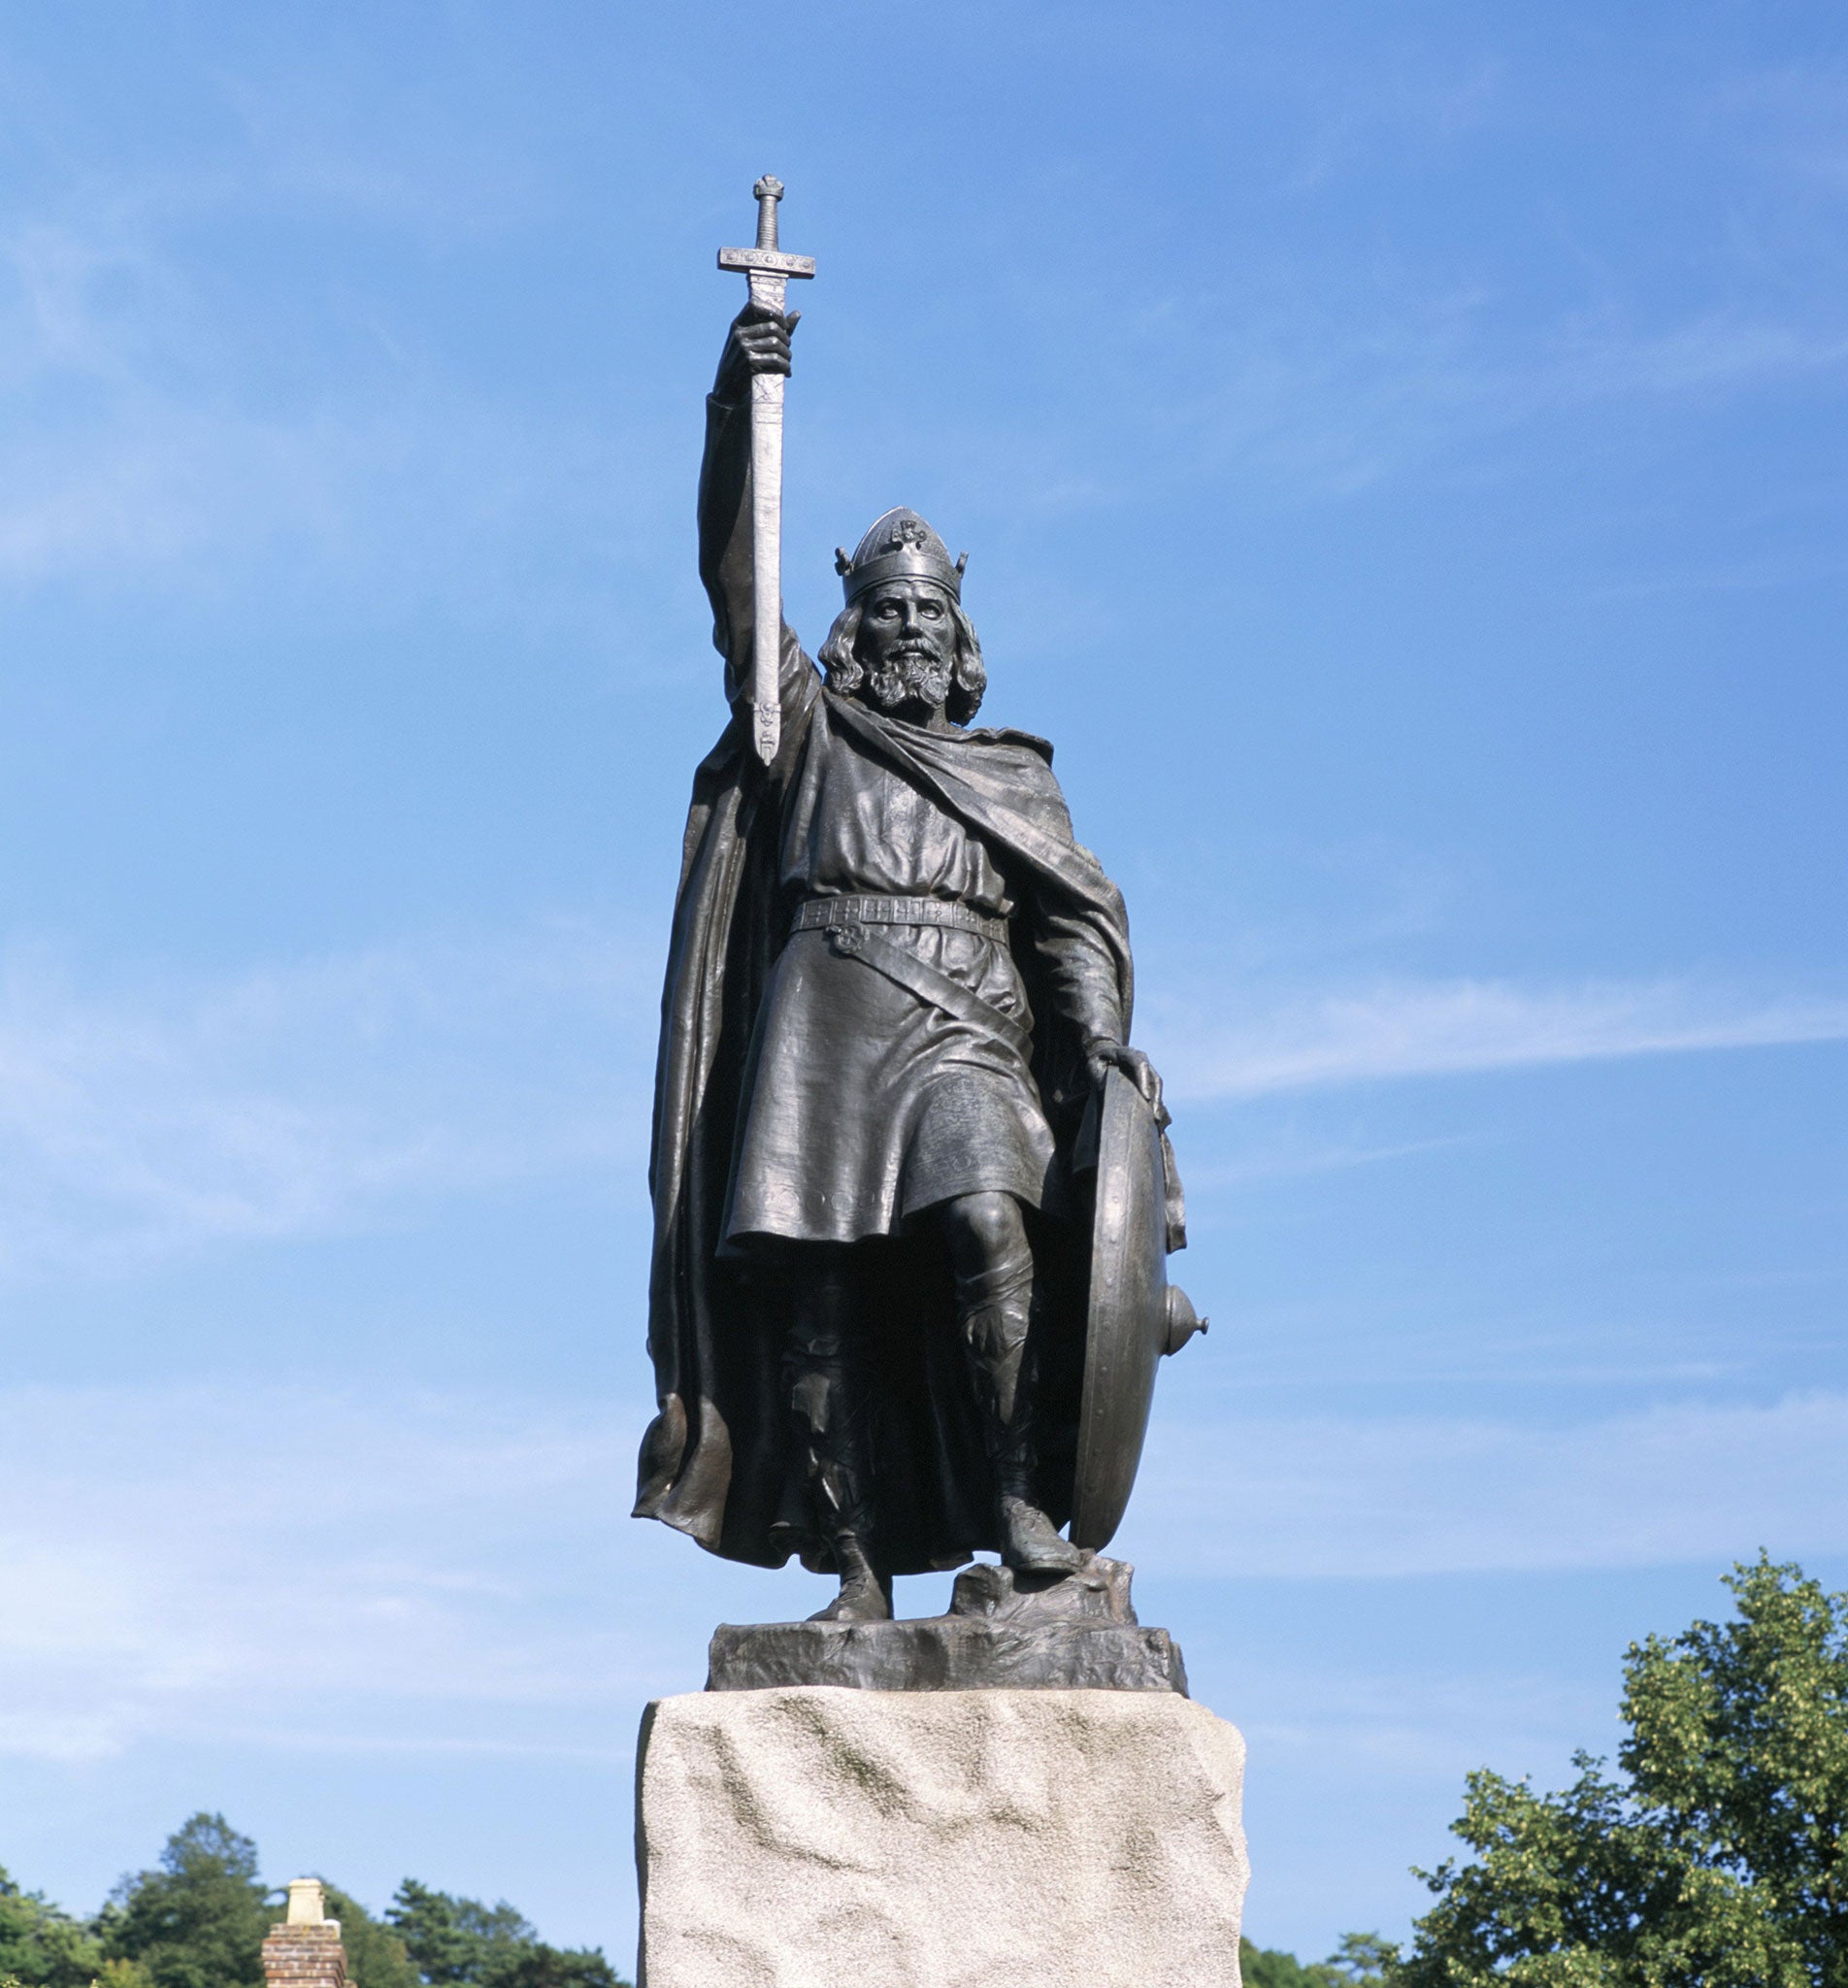 The grandson of Alfred the Great is recognised as the first King of England - what was his name?